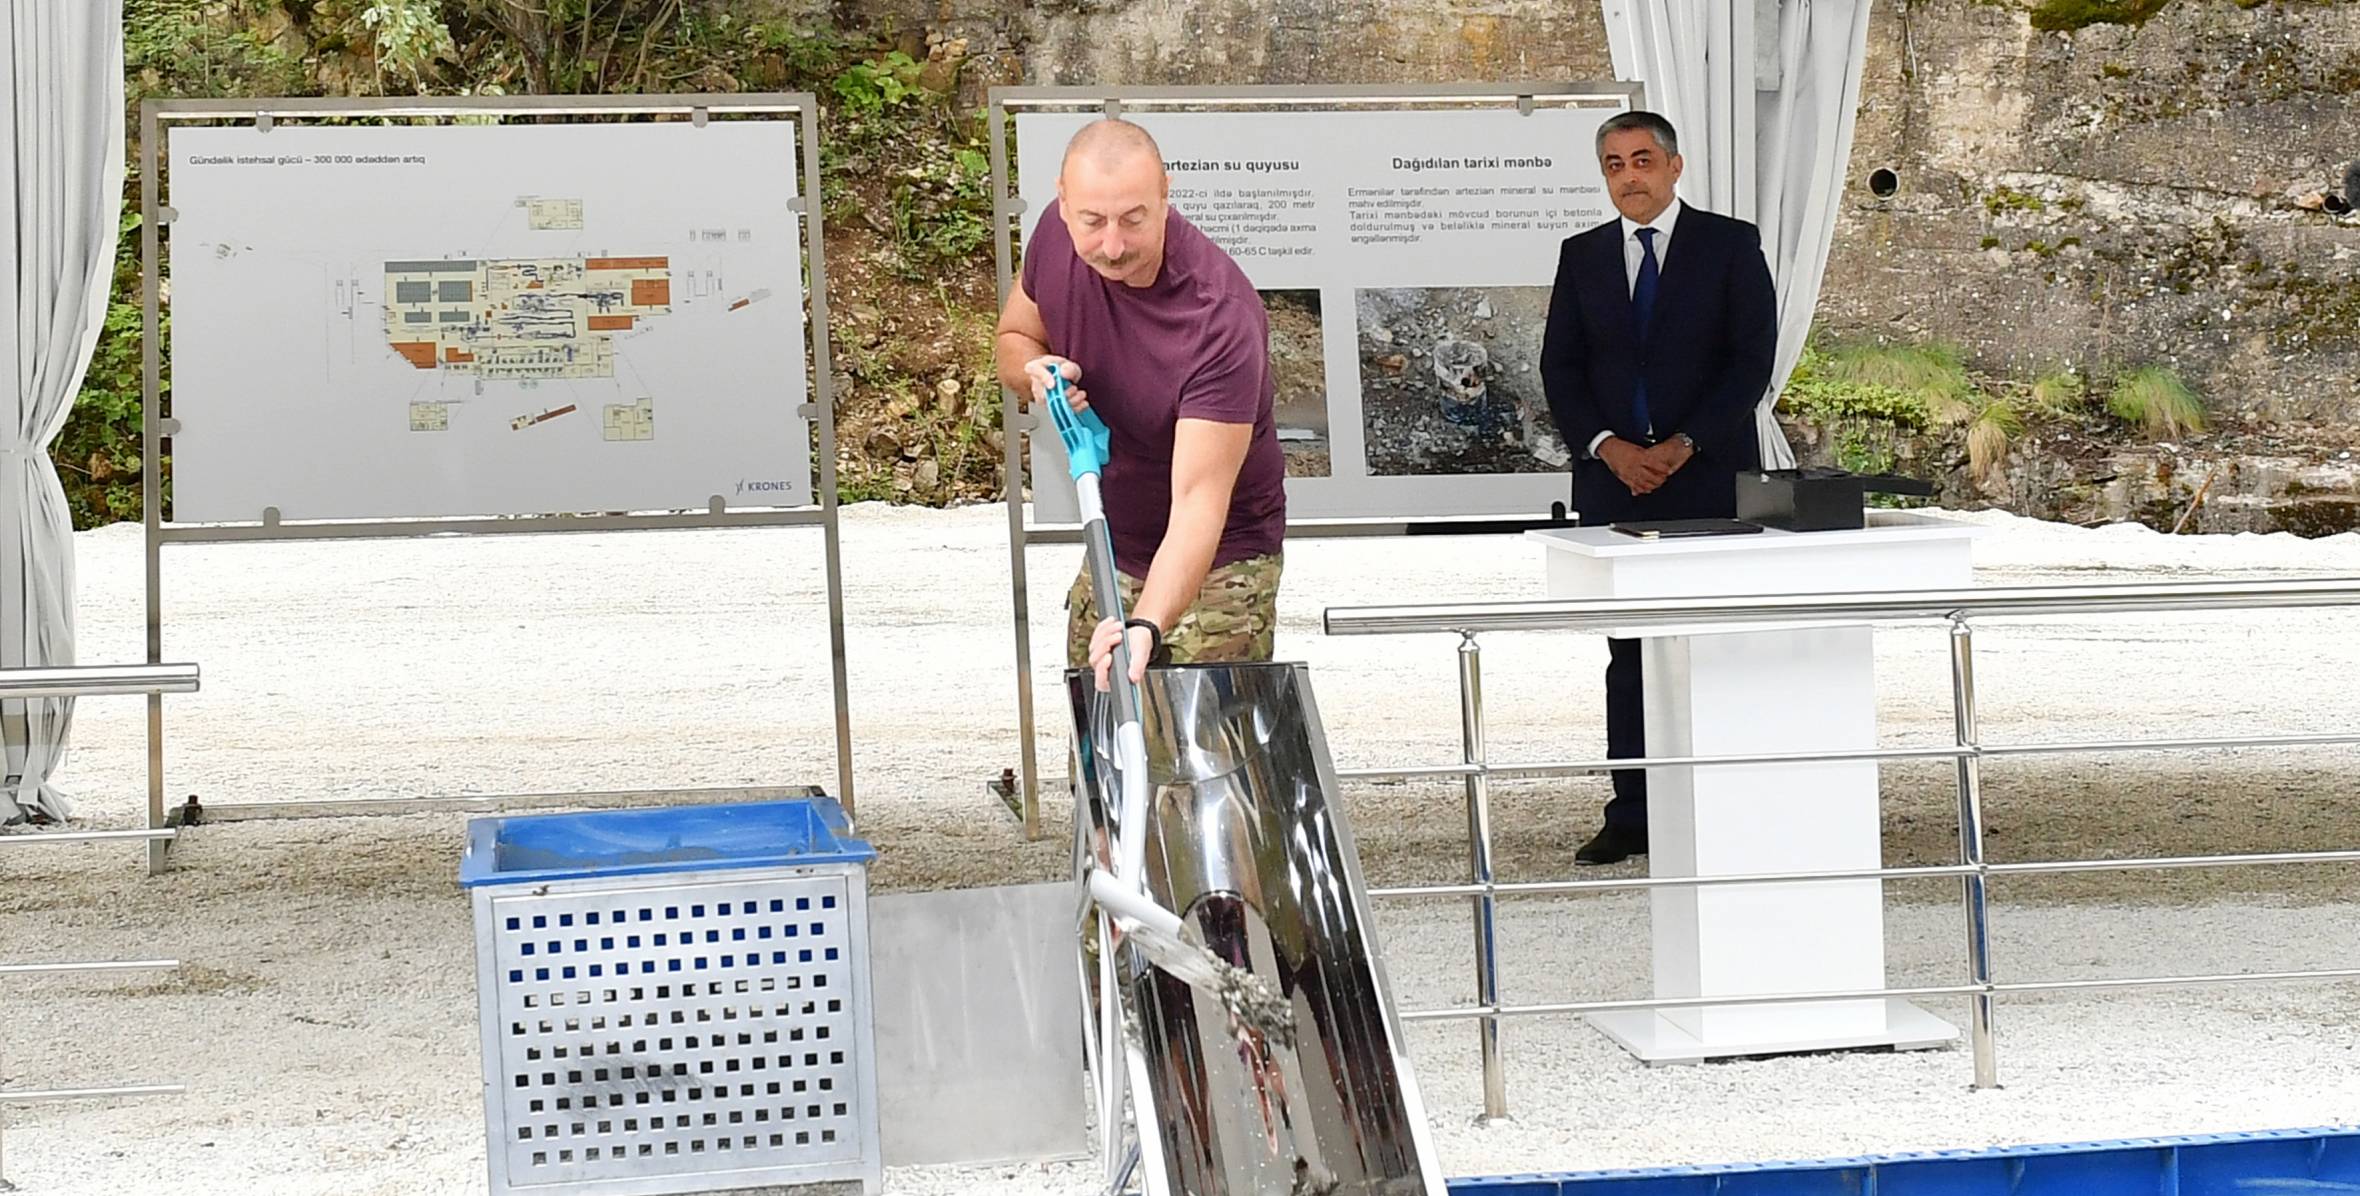 Foundation stone was laid for the “Istisu” mineral water plant in Kalbadjar